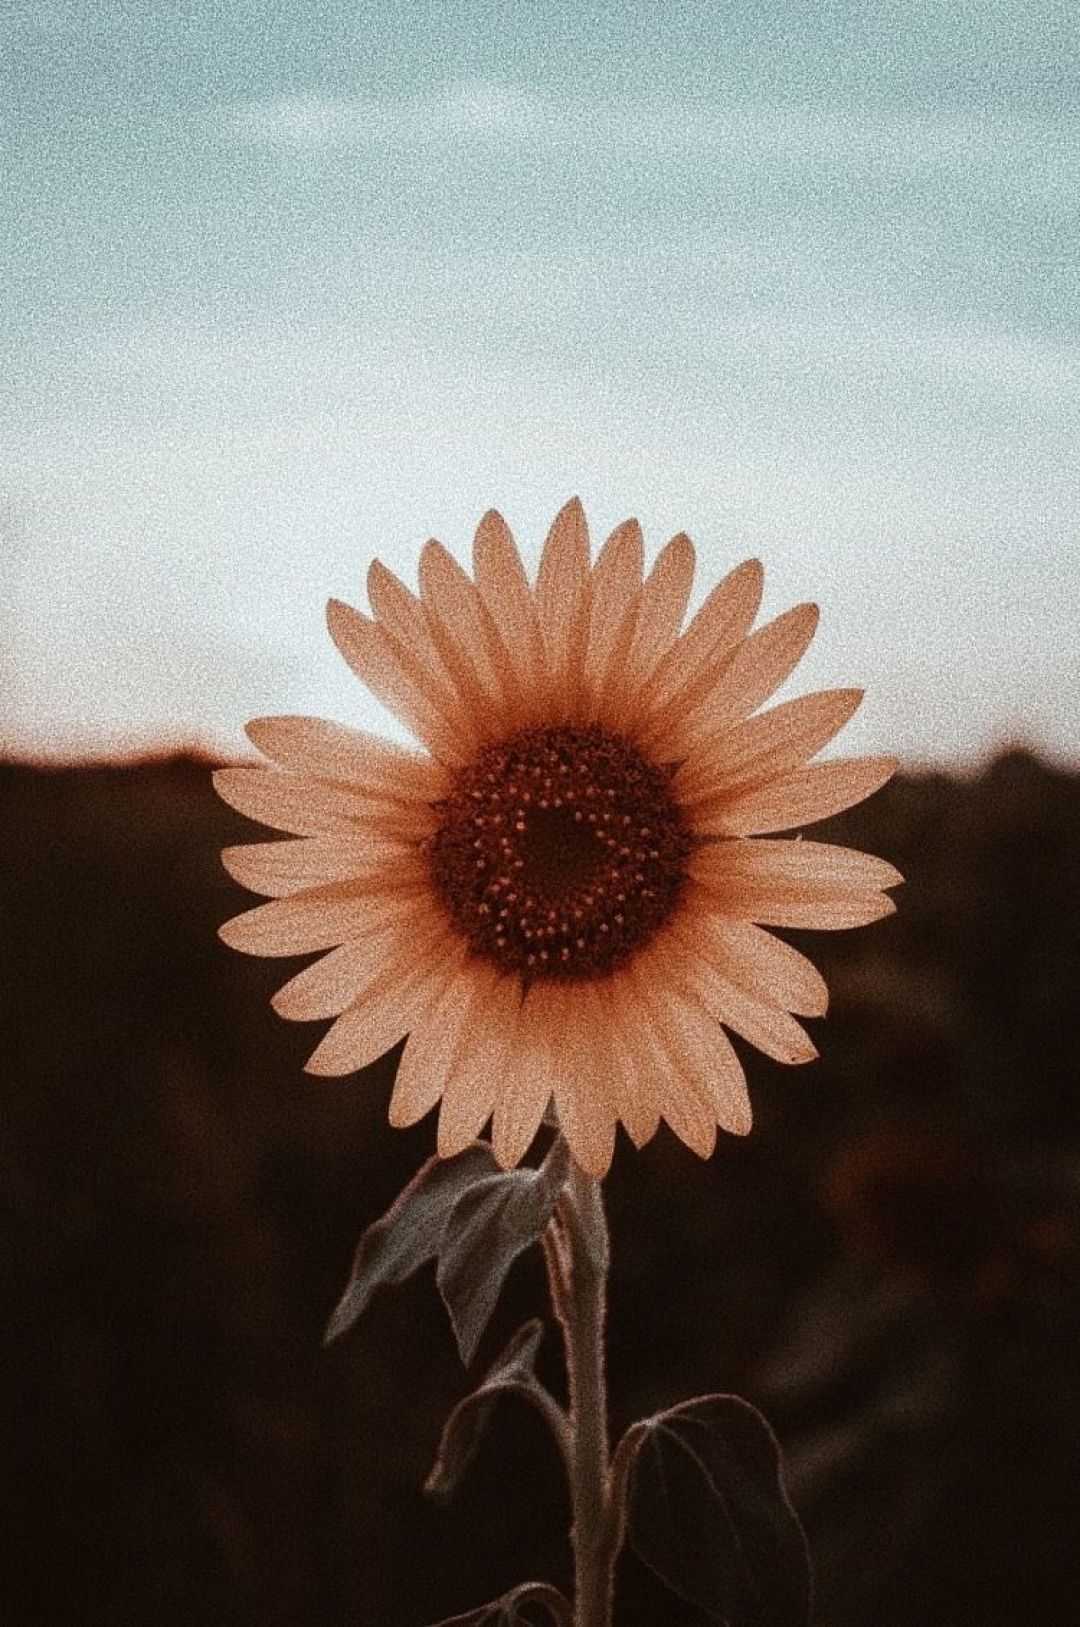 A sunflower is standing in the middle of an empty field - Photography